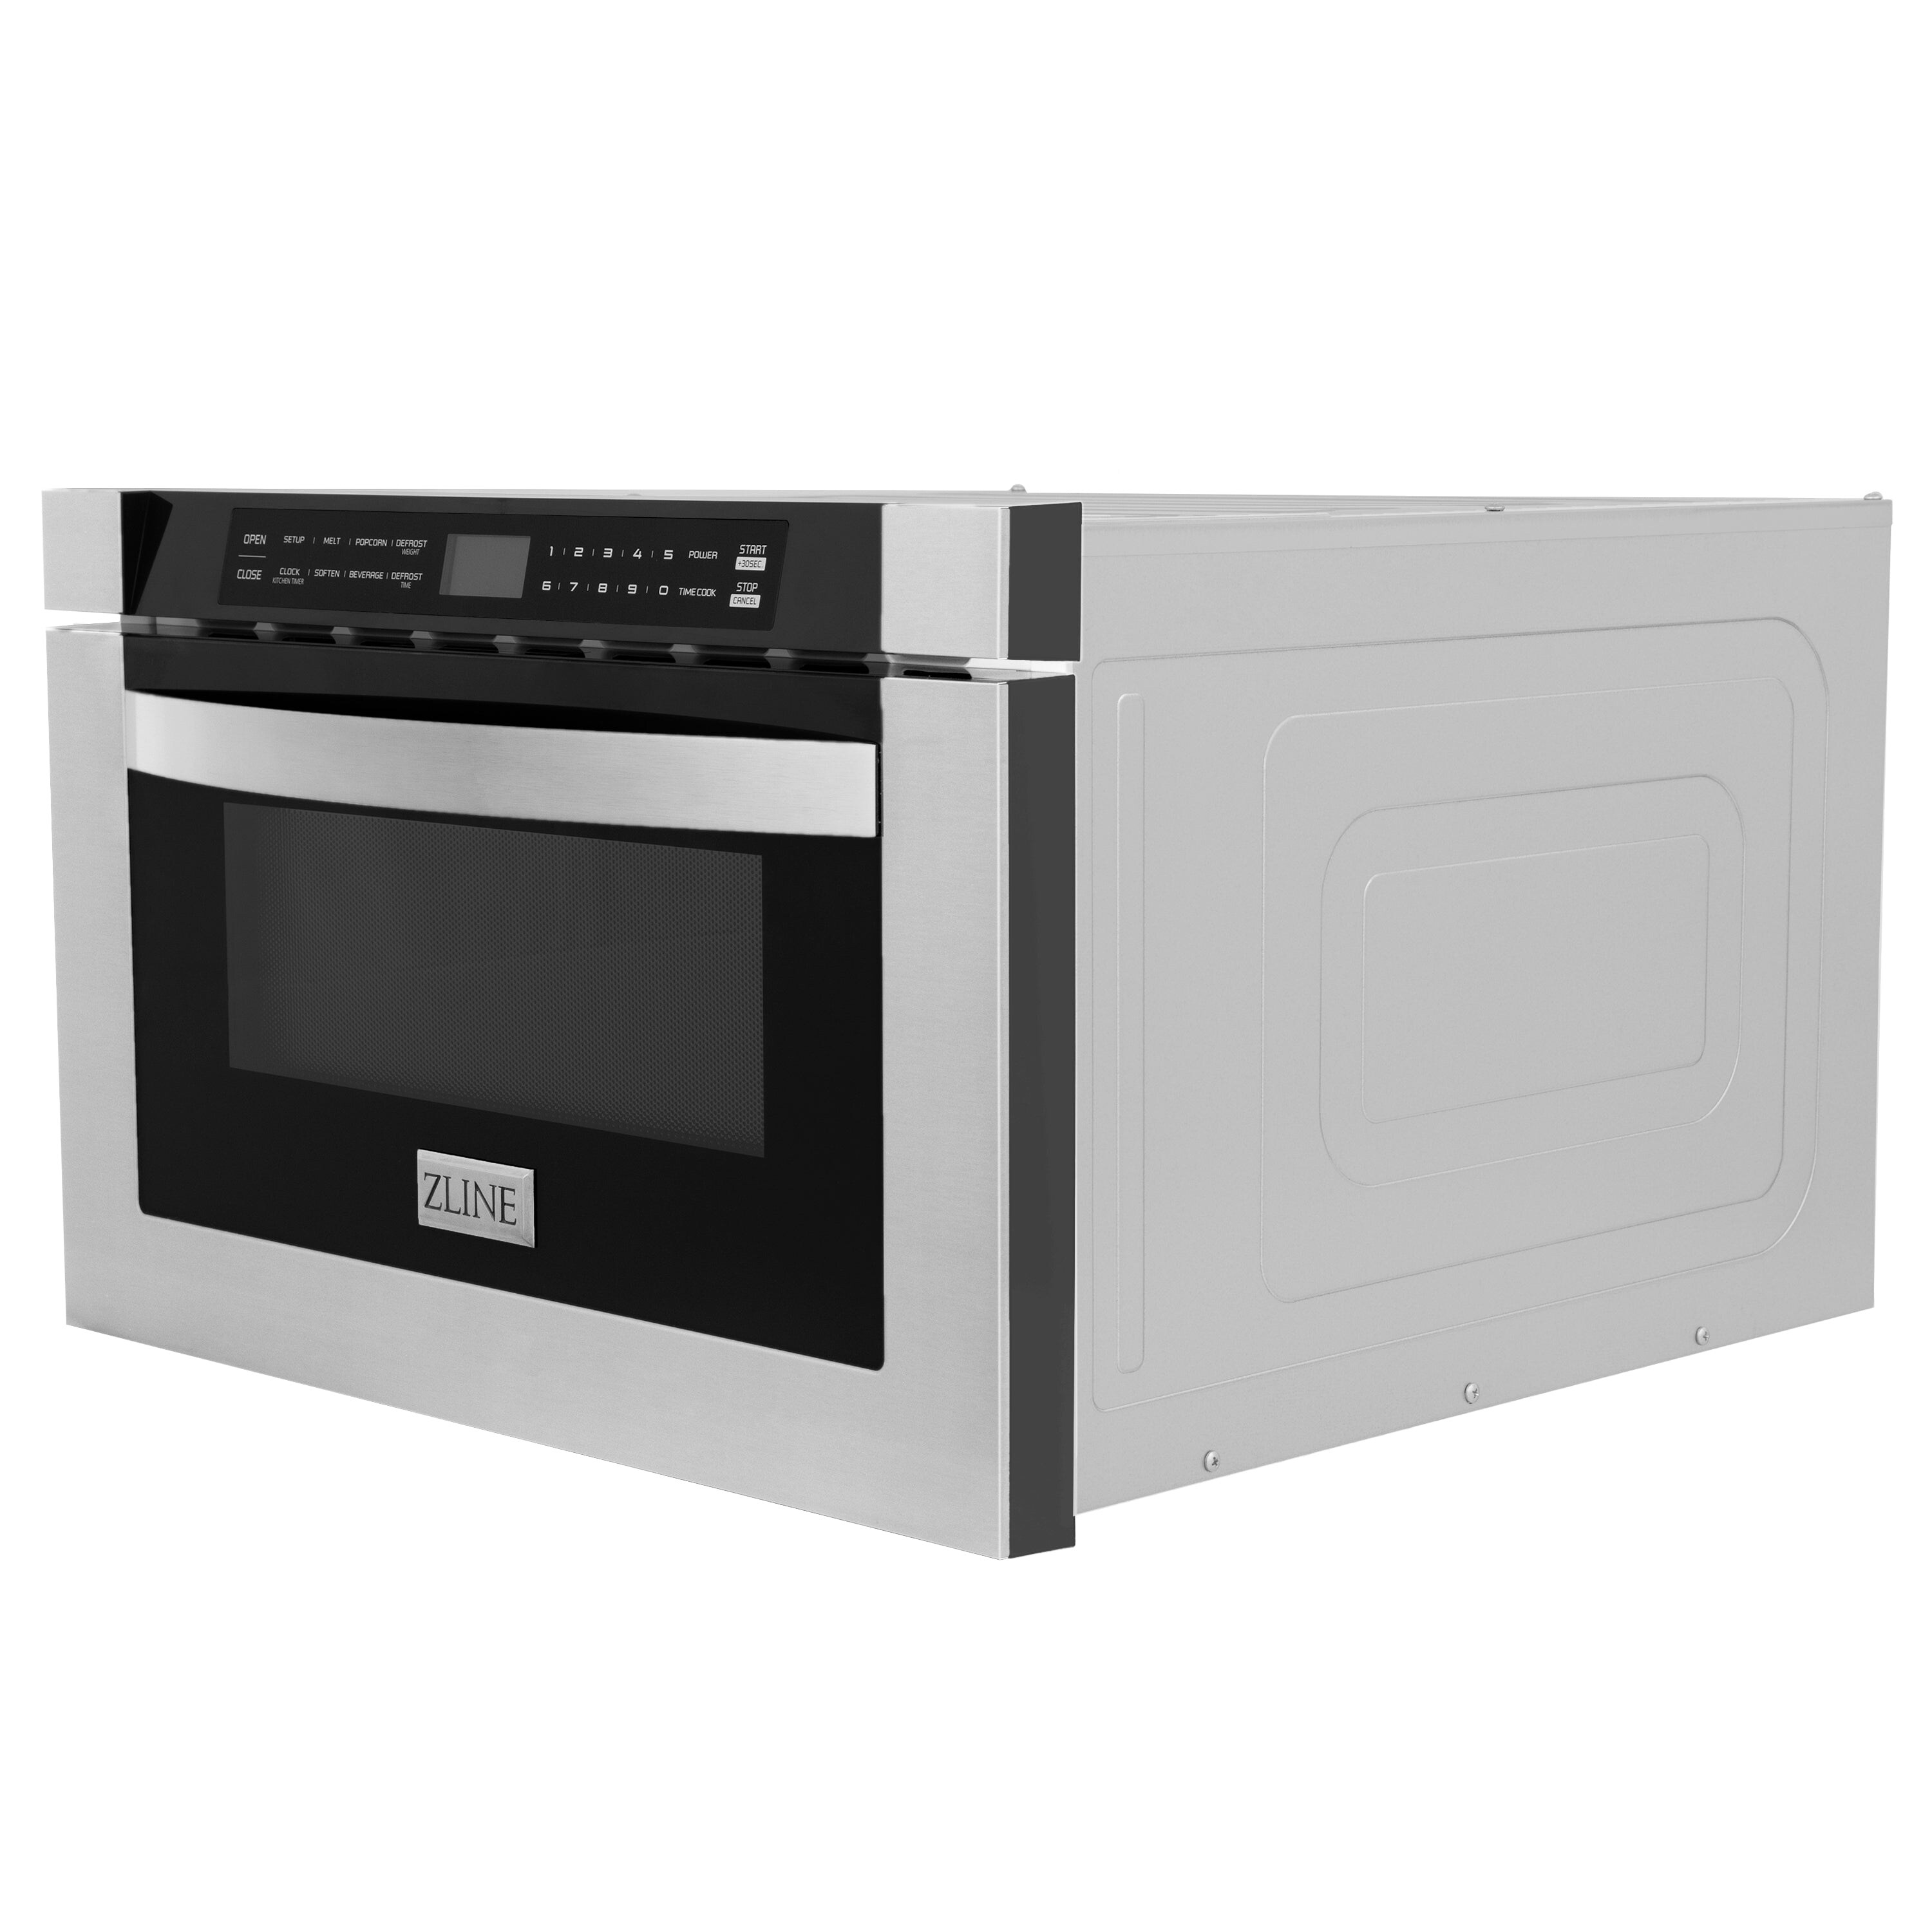 BUILT-IN 0.7 Cu. Ft. Deluxe Microwave Oven w/ Trim Kit - Stainless Steel